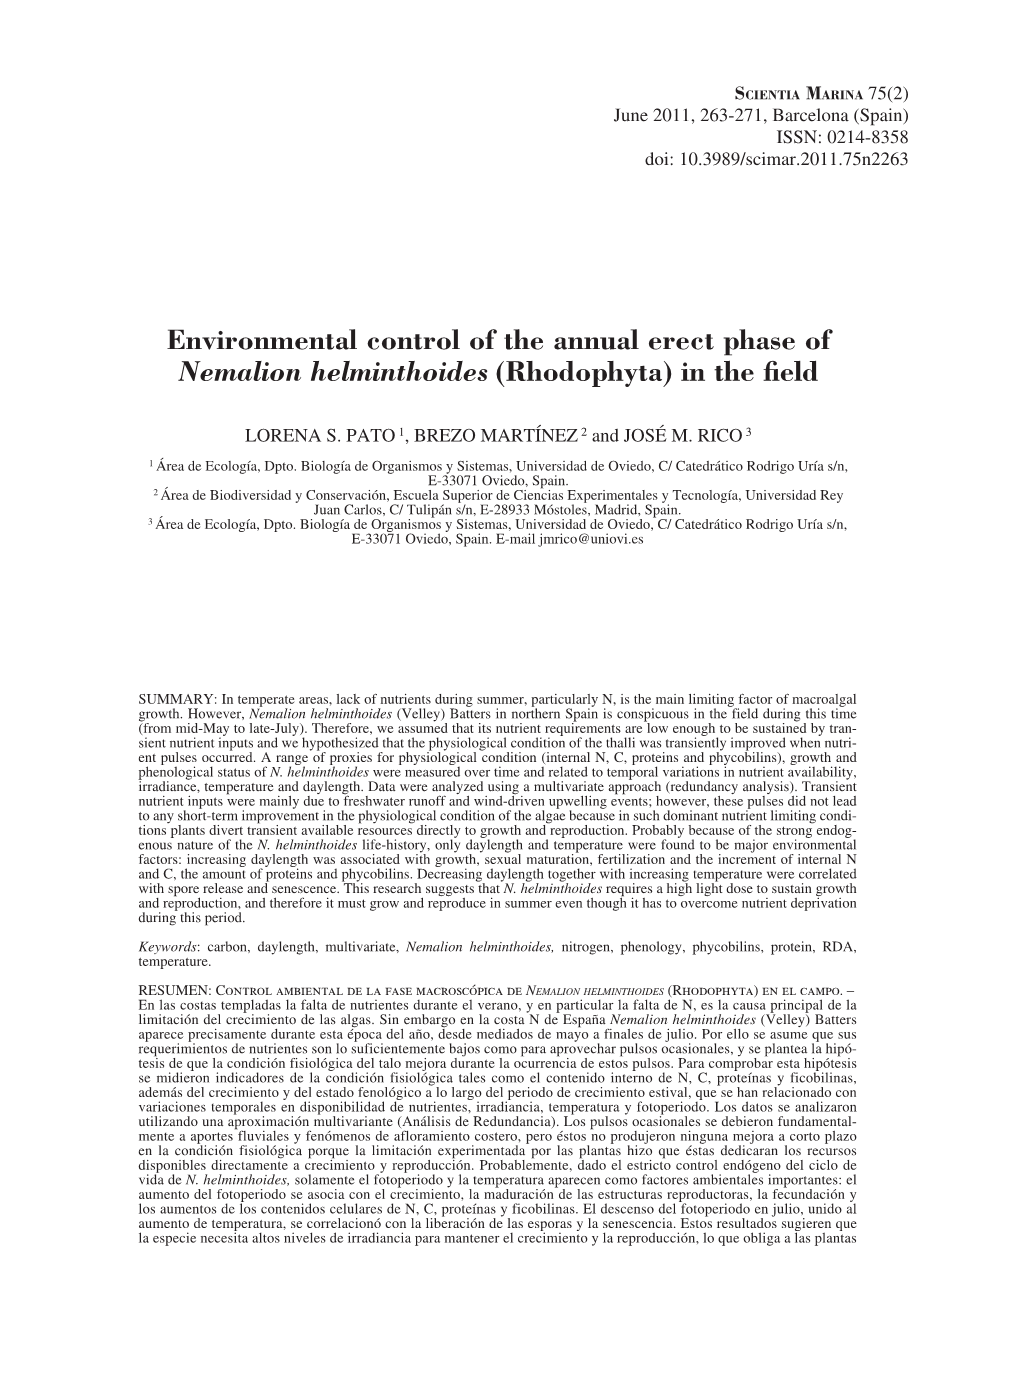 Environmental Control of the Annual Erect Phase of Nemalion Helminthoides (Rhodophyta) in the Field